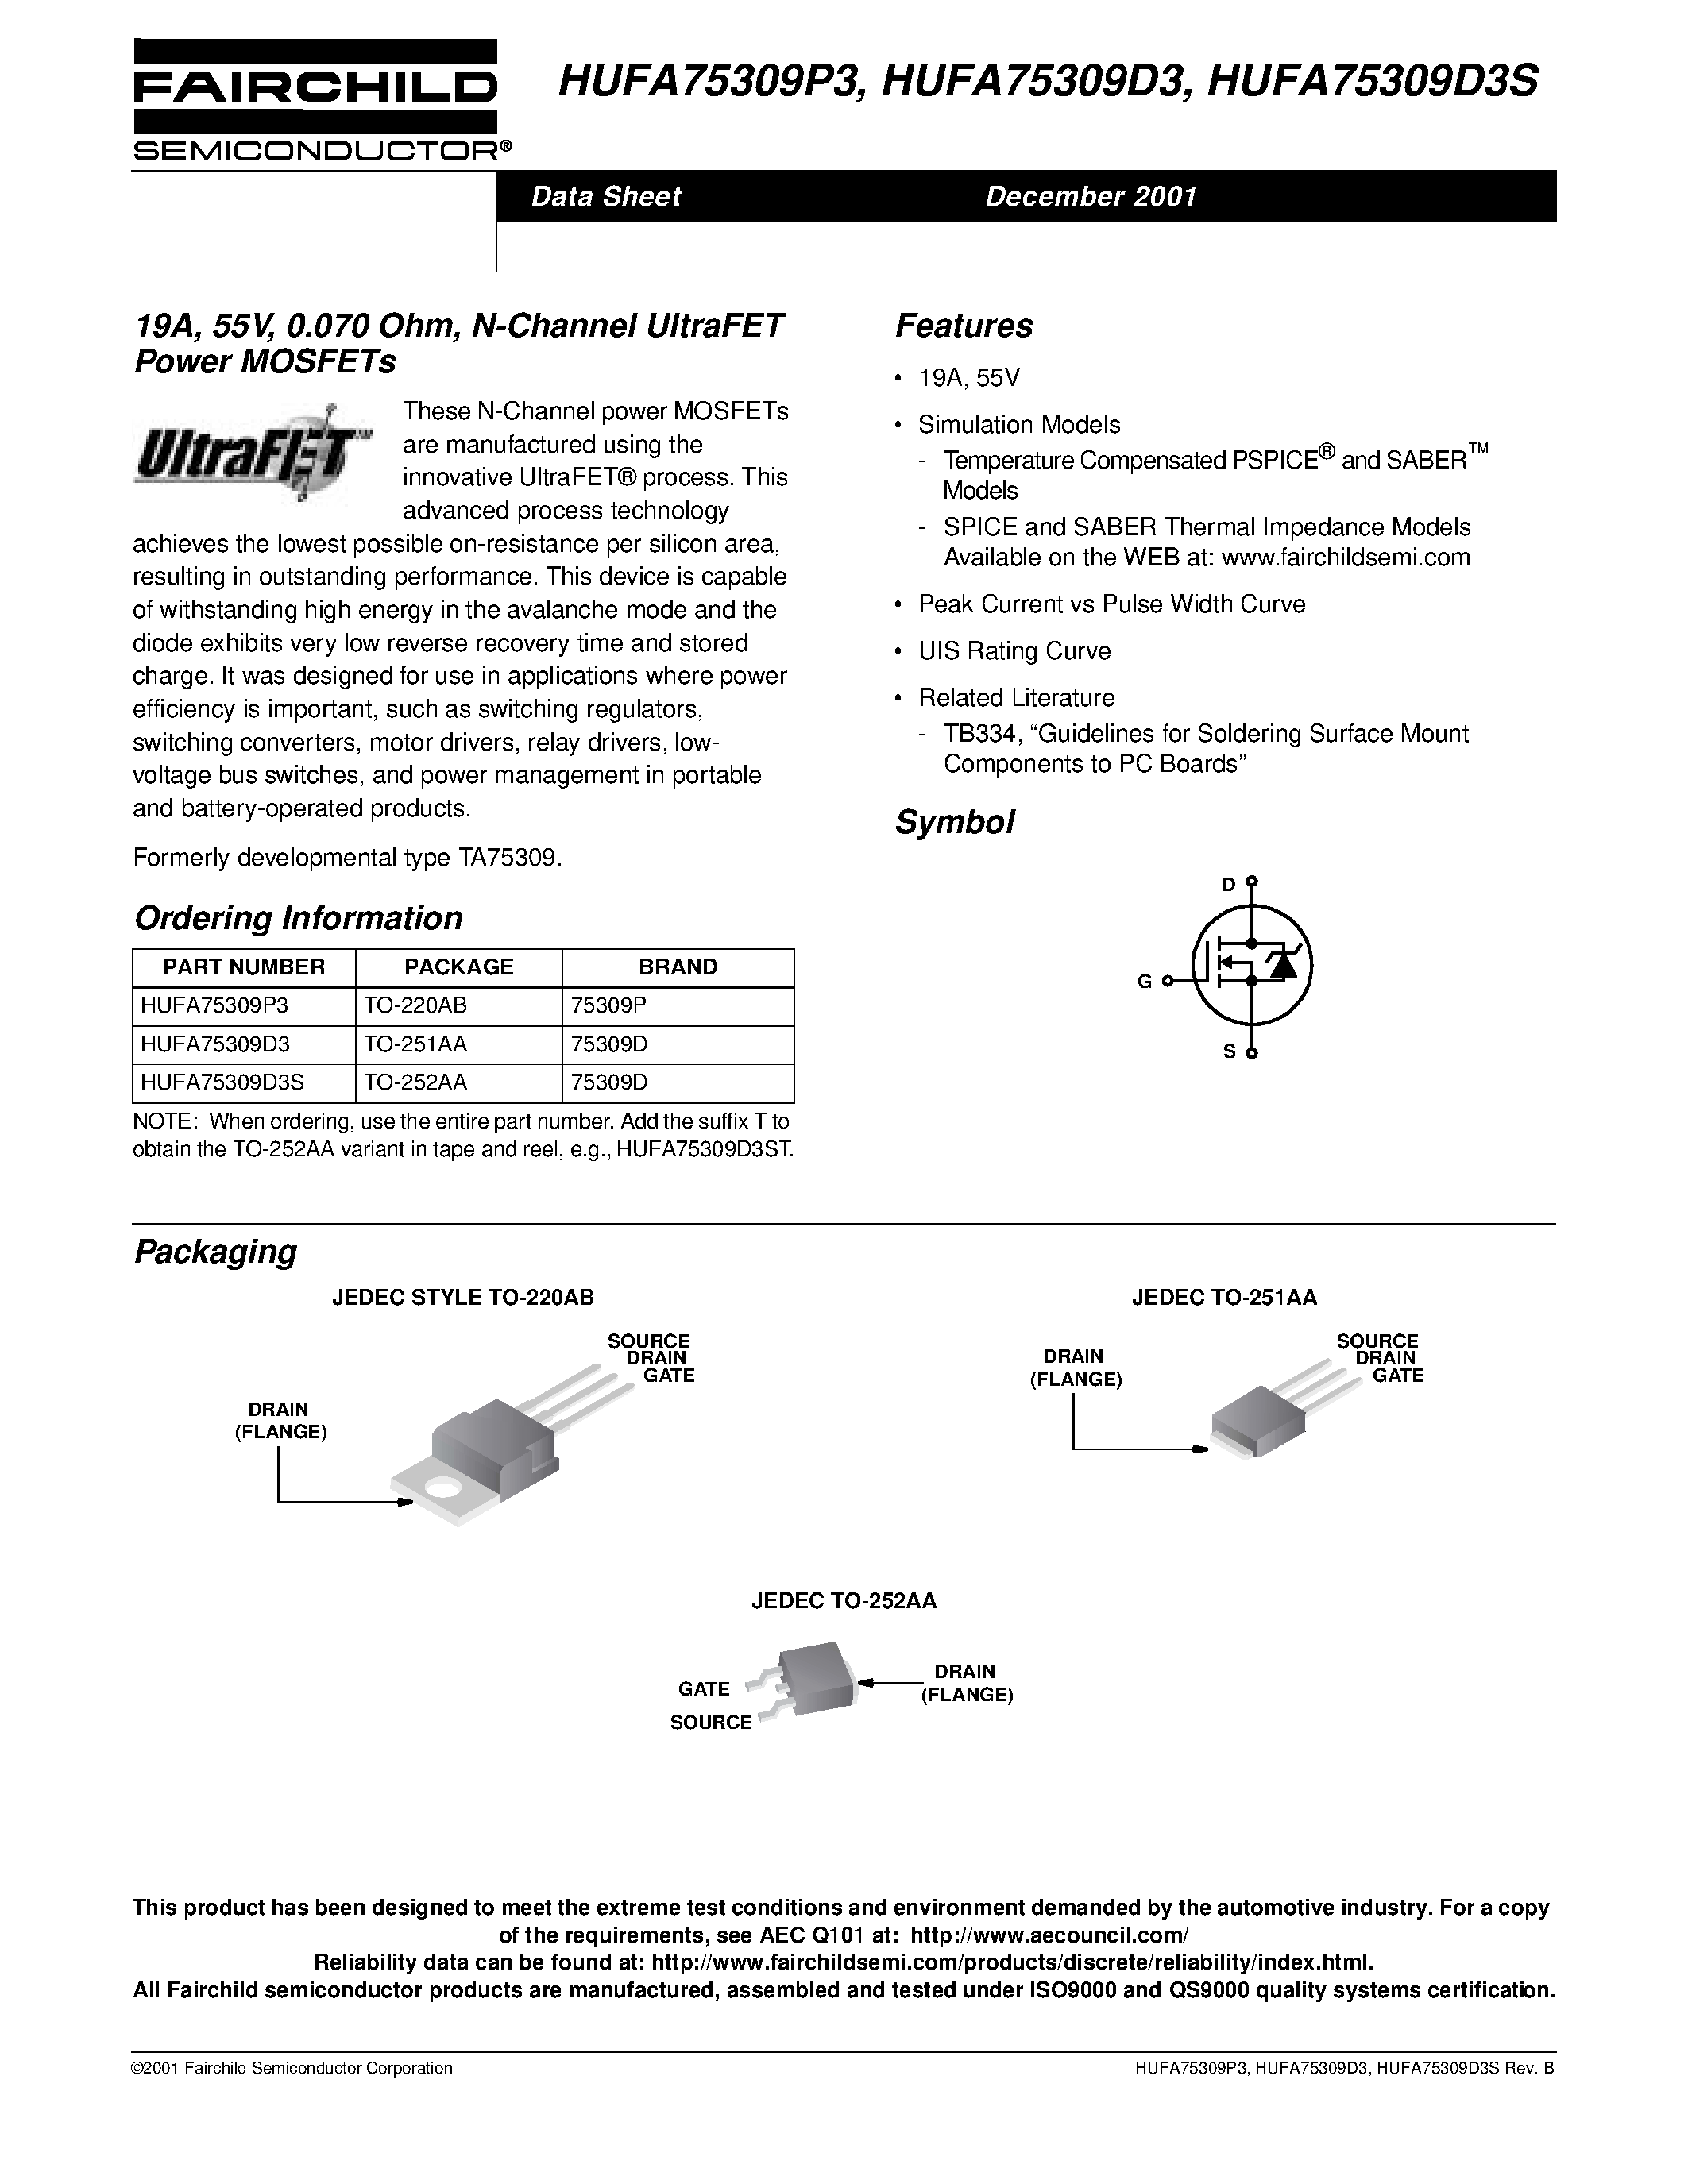 Datasheet HUFA75309D3 - 19A/ 55V/ 0.070 Ohm/ N-Channel UltraFET Power MOSFETs page 1